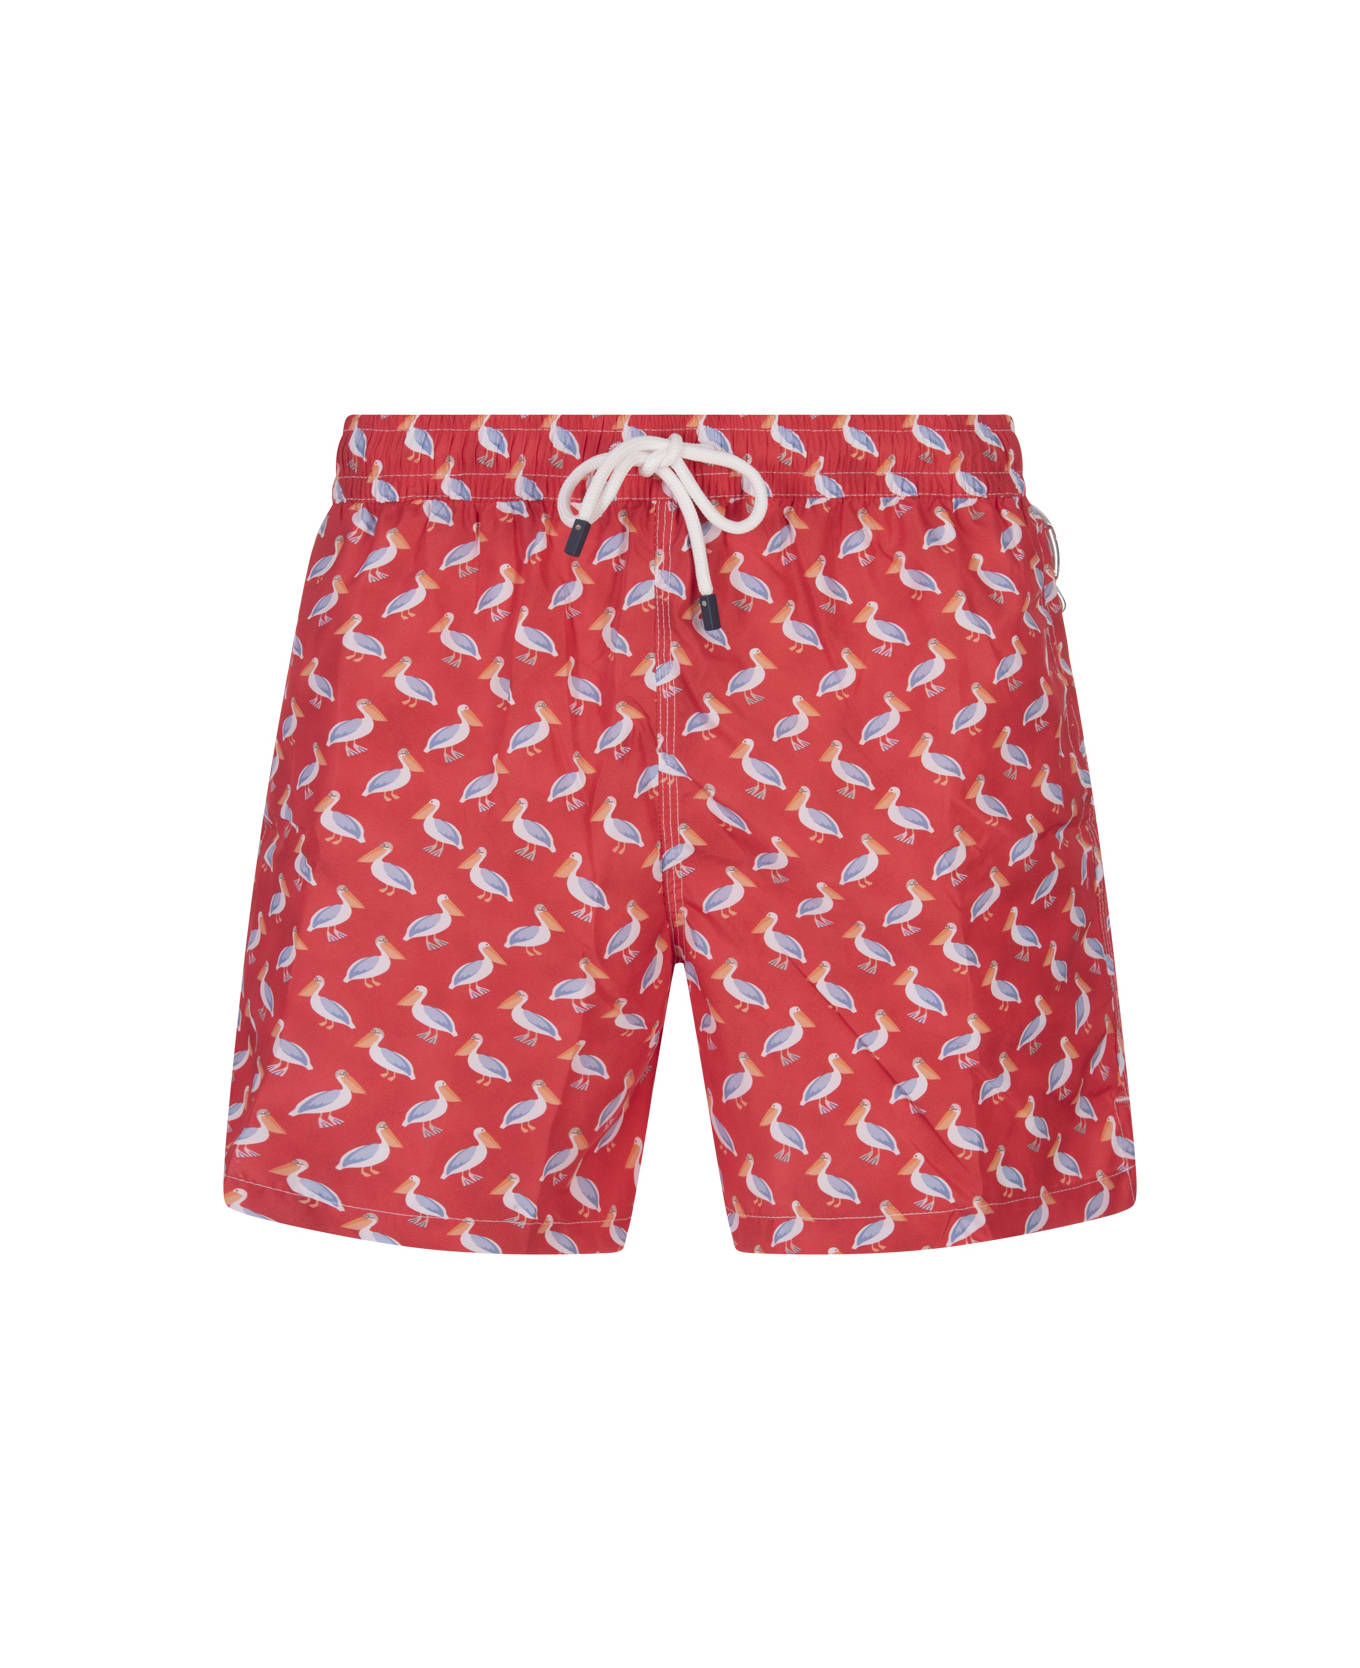 Fedeli Red Swim Shorts With Pelican Pattern - Red